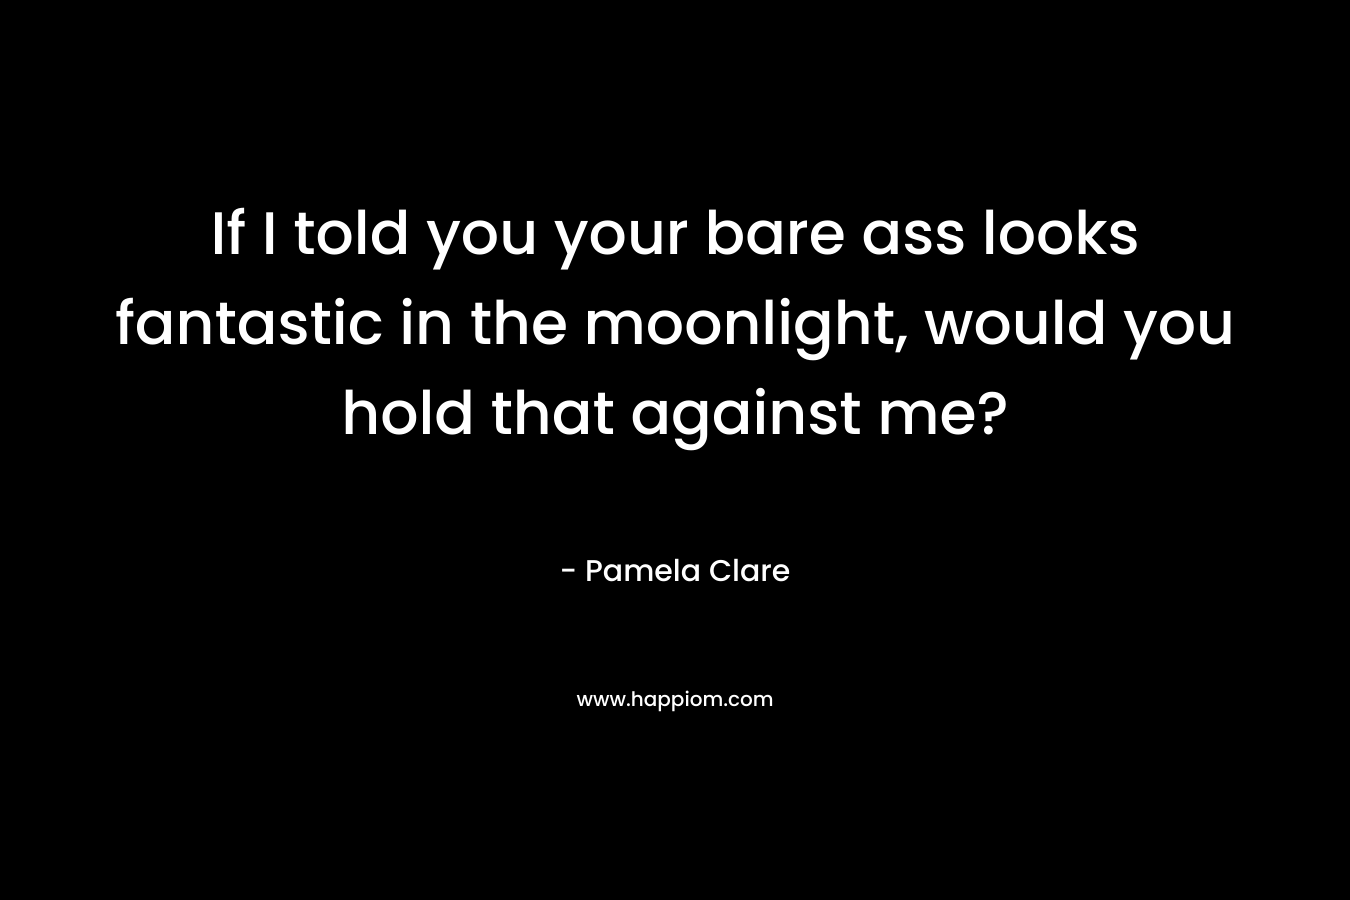 If I told you your bare ass looks fantastic in the moonlight, would you hold that against me?